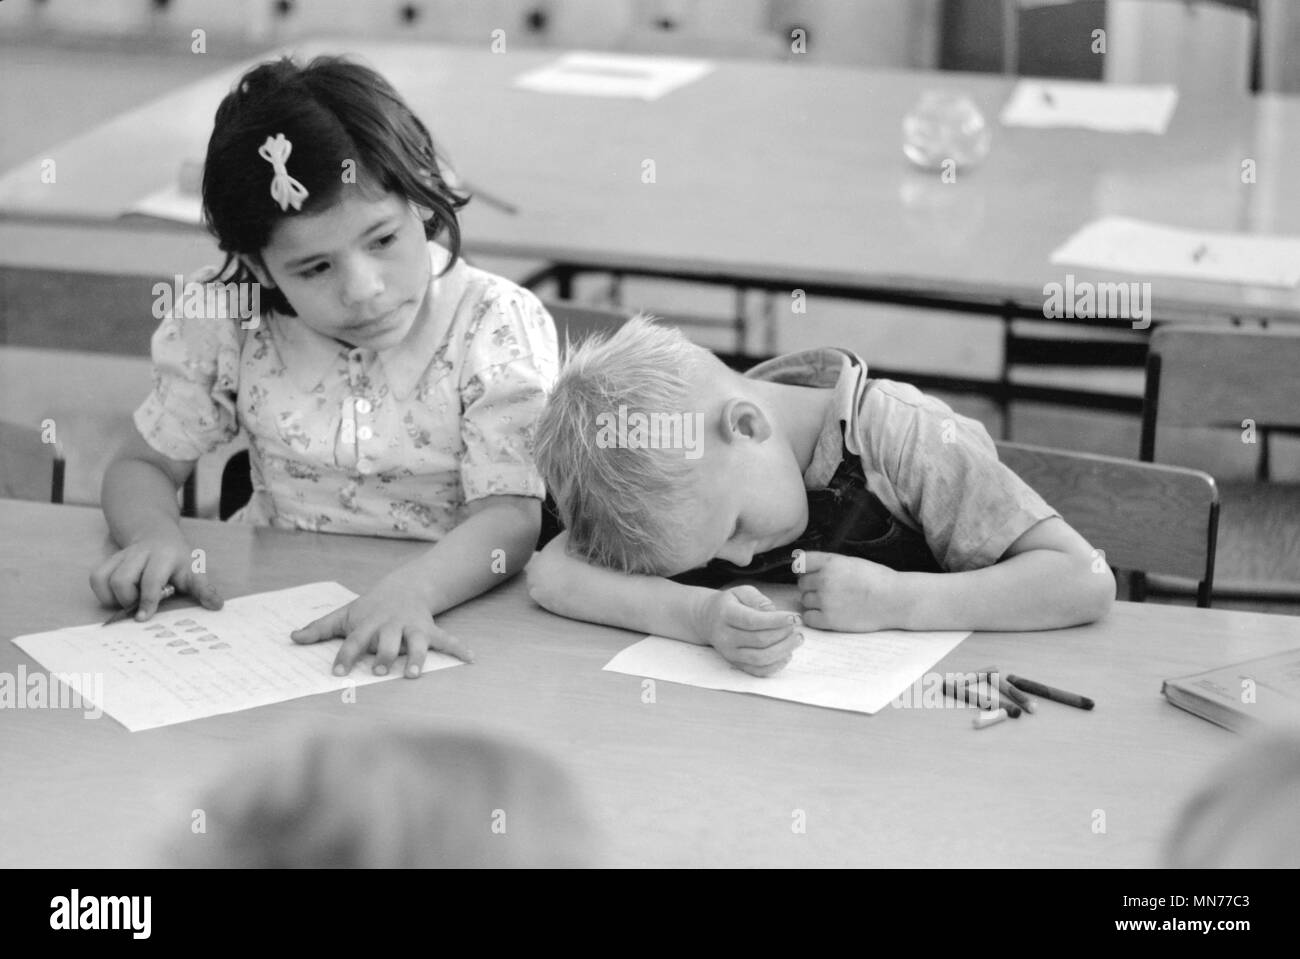 Two Children of Migratory Workers in Elementary School Classroom at FSA Camp, Weslaco, Texas, USA, Arthur Rothstein for Farm Security Administration, February 1942 Stock Photo